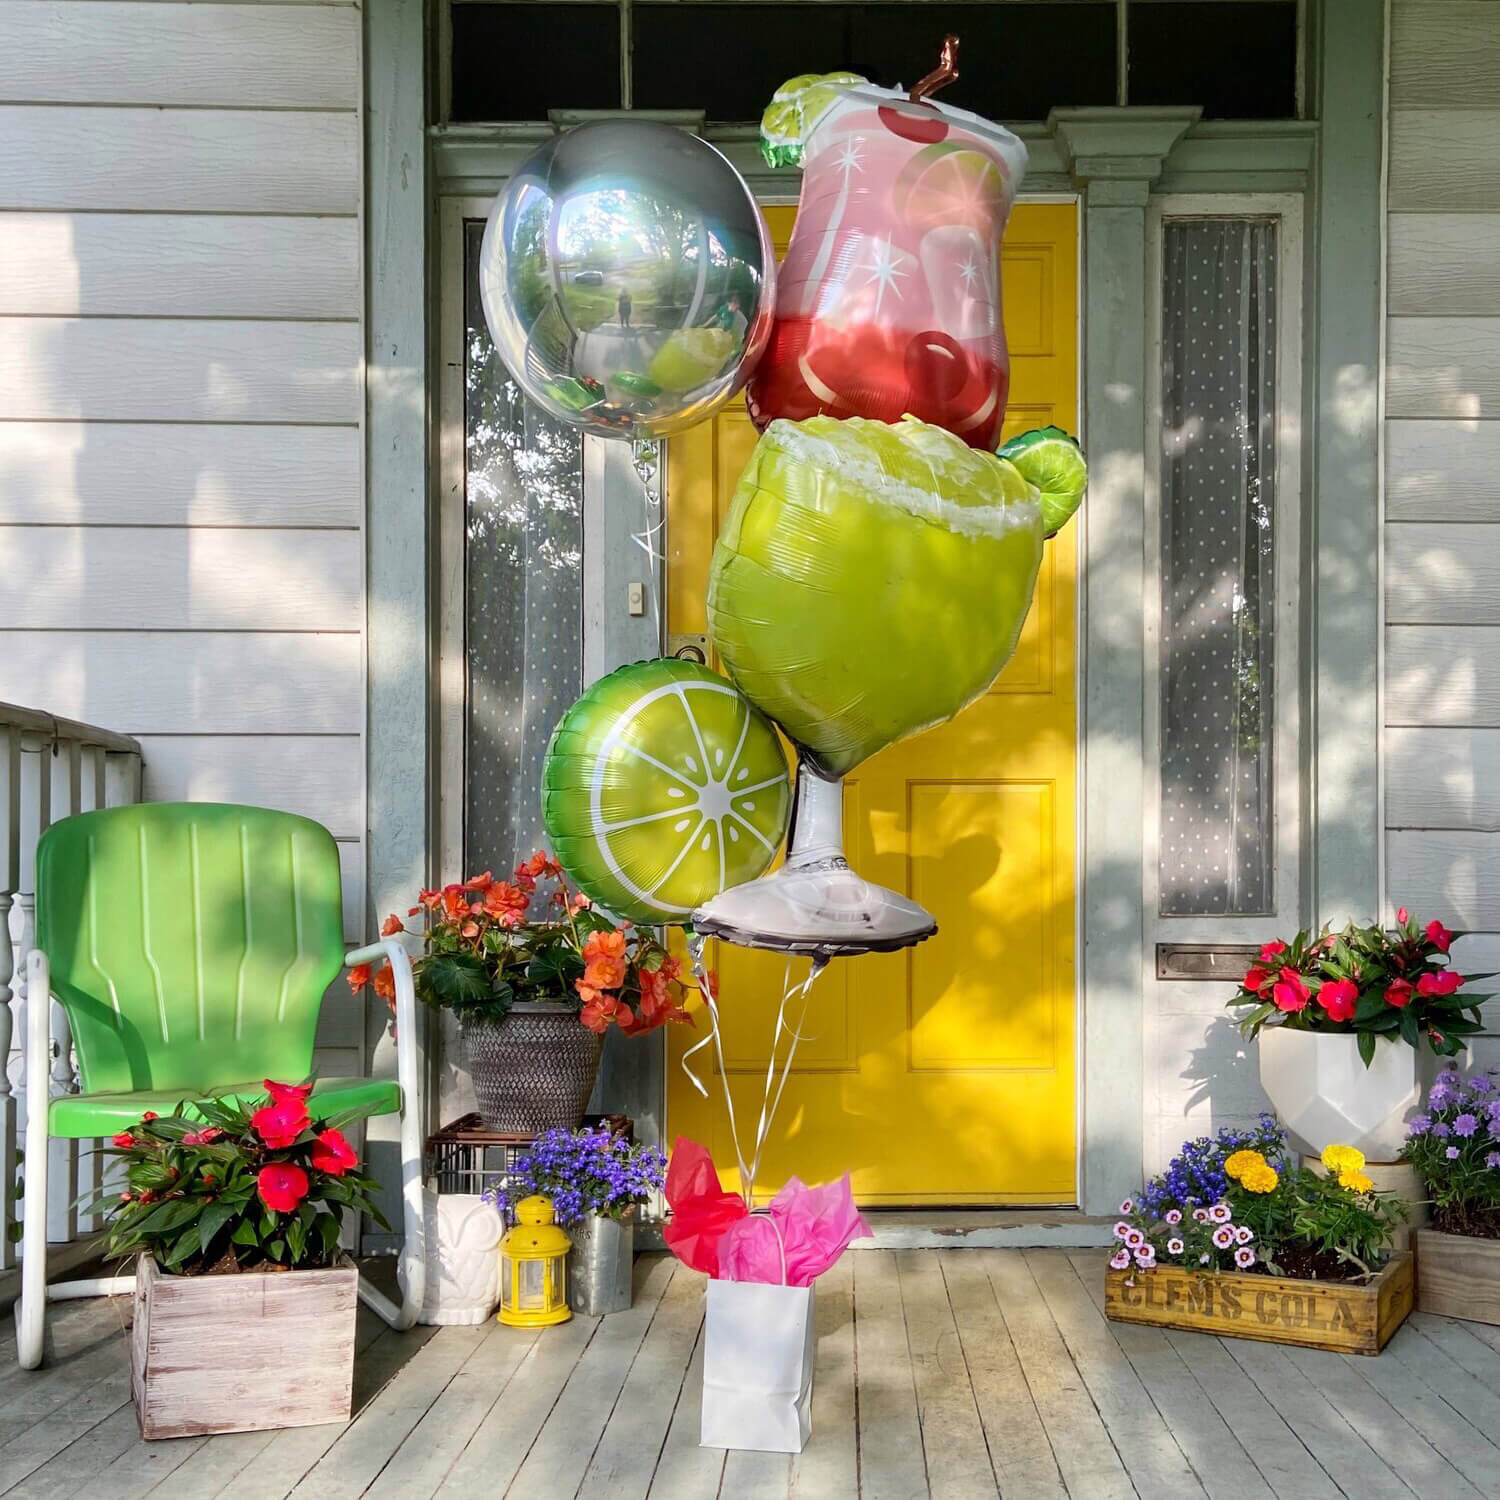 Oversized helium bouquet with margarita, lime slice, and pink tropical drink balloons from Just Peachy in Little Rock, Arkansas.